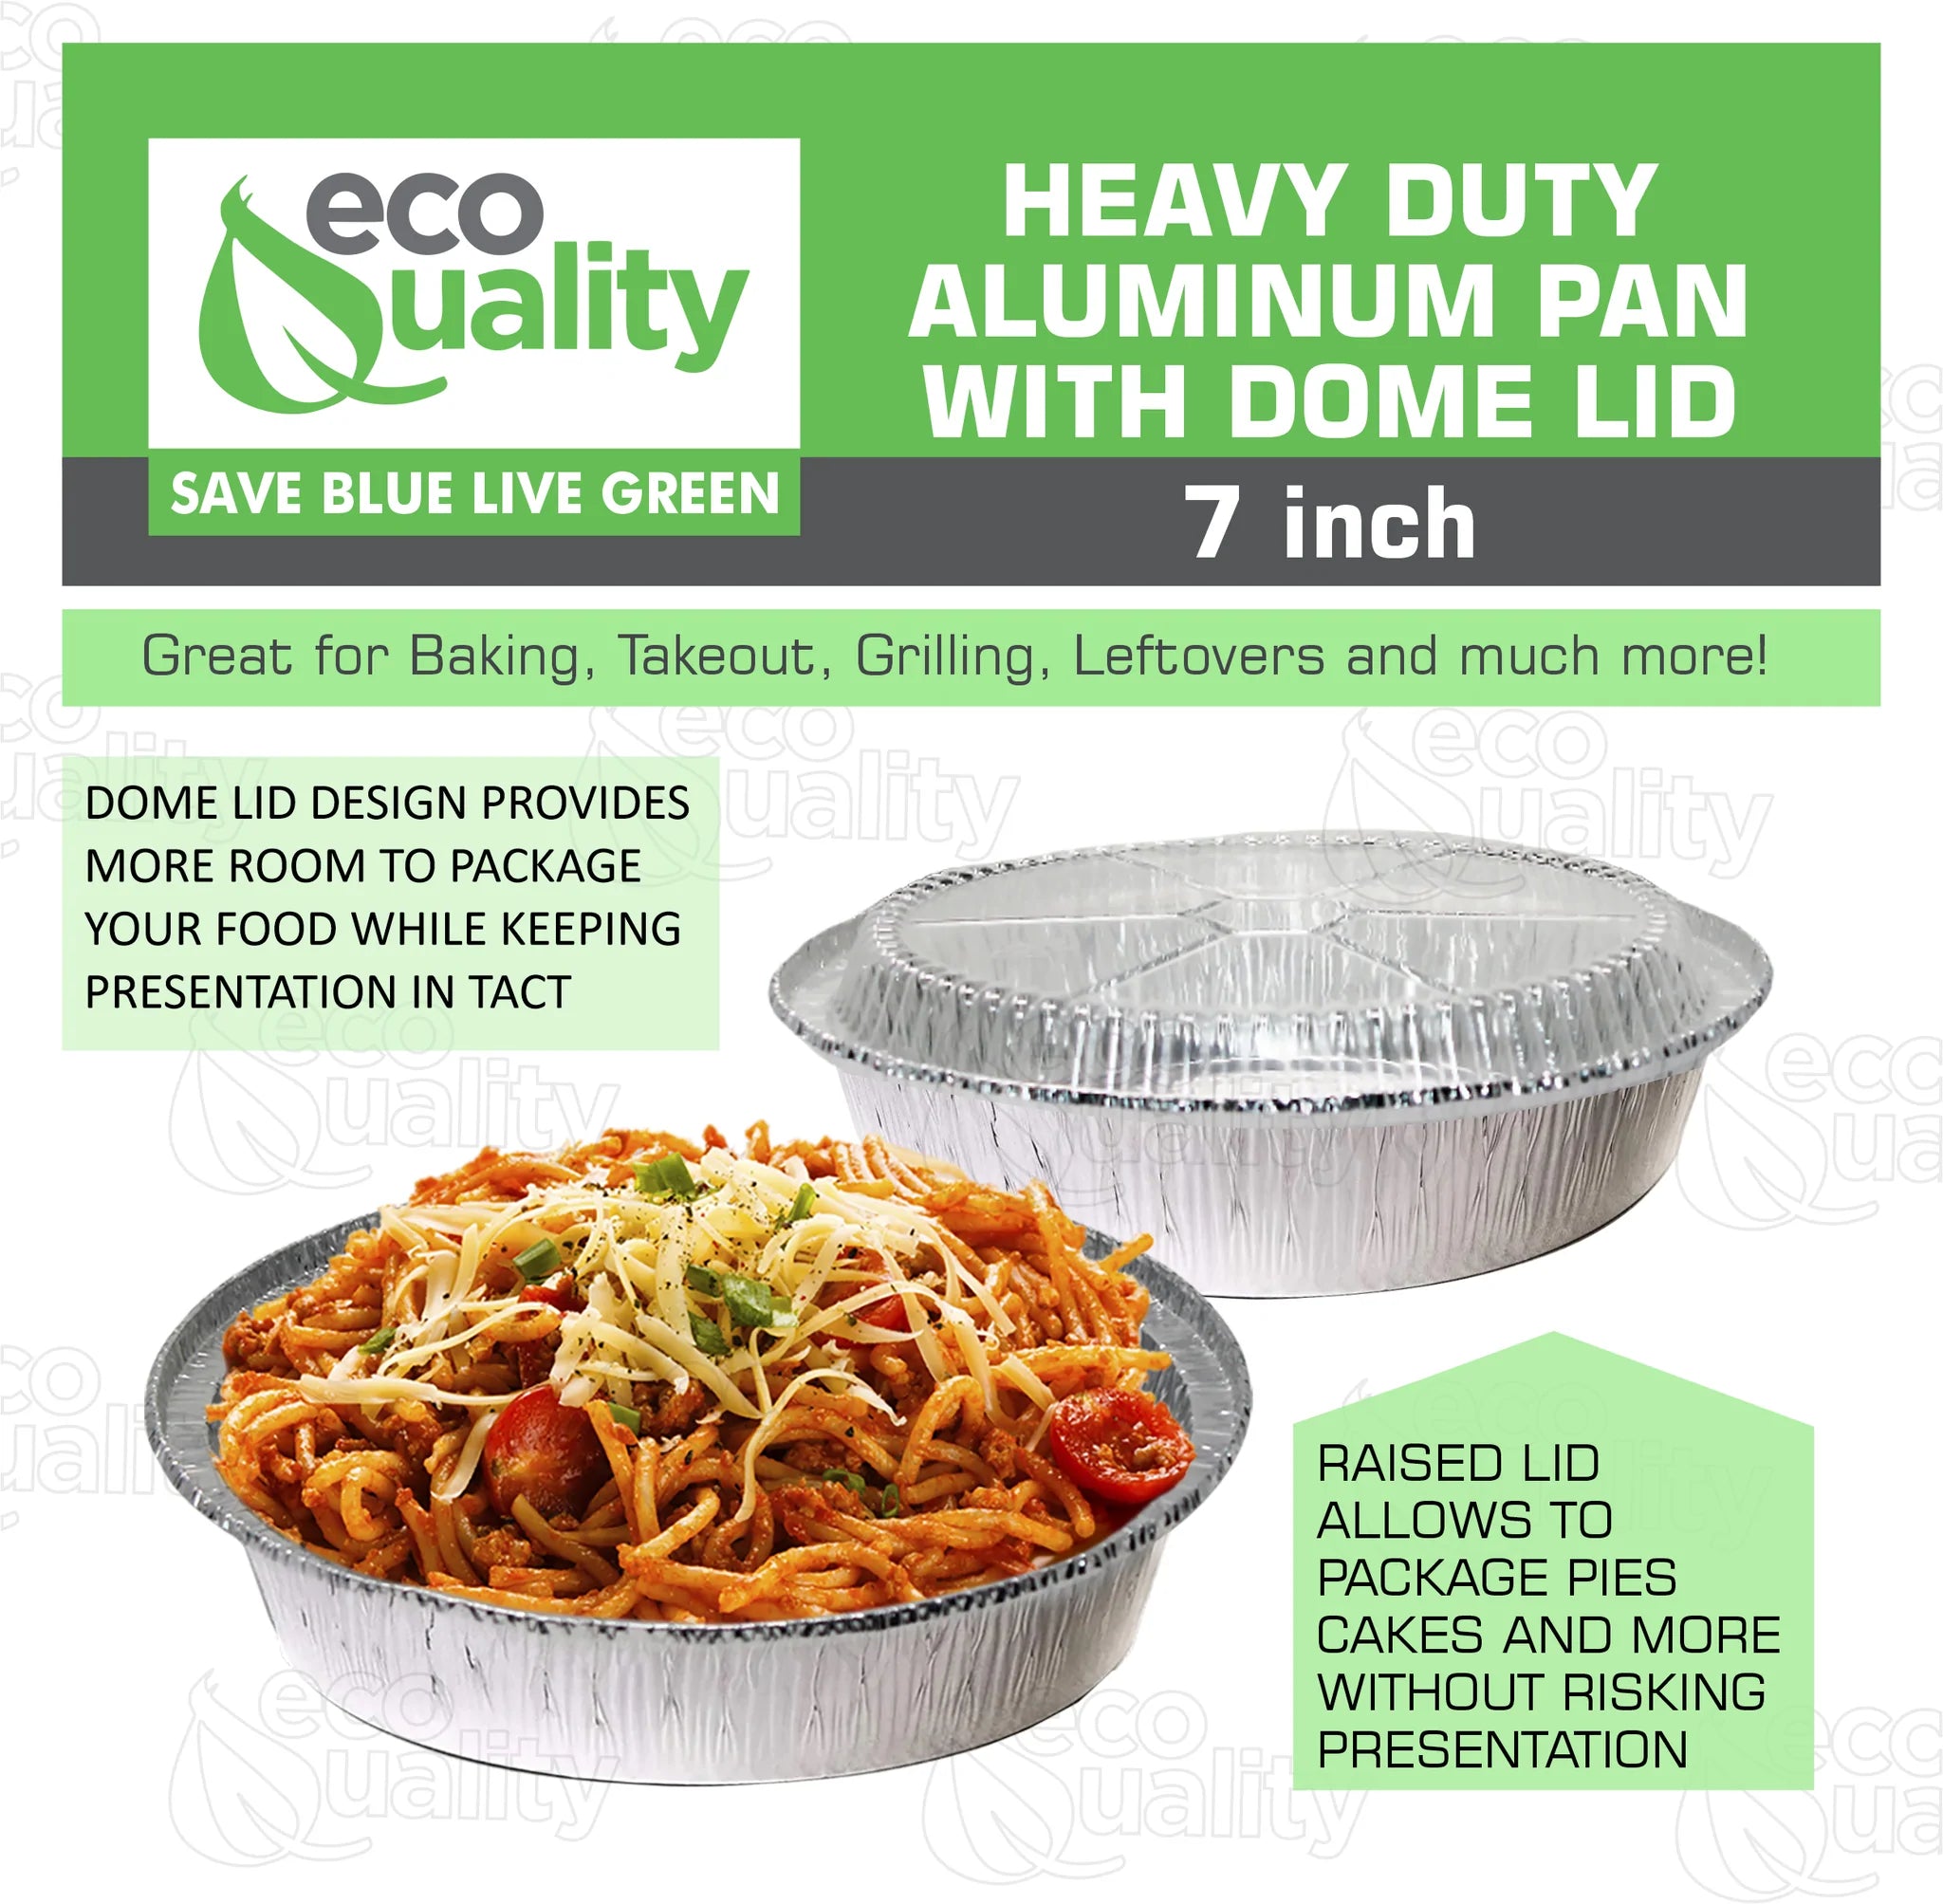 with clear dome lid  Take out to go container tin  stackable round leak proof  serve Cold hot food  Round Foil Aluminum Pan  Restaurant Meal Prep Food Trucks  High Quality Recyclable Aluminum  hemmed edges silver  heavy duty strong sturdy  freezer safe reusable recyclable  entrees appetizers sides desserts  dinner lunch breakfast  Container  Caterers Buffet  Baking Oven Cake Supplies  affordable bulk economical commercial wholesale  7 inches diameter 22 fluid ounces oz